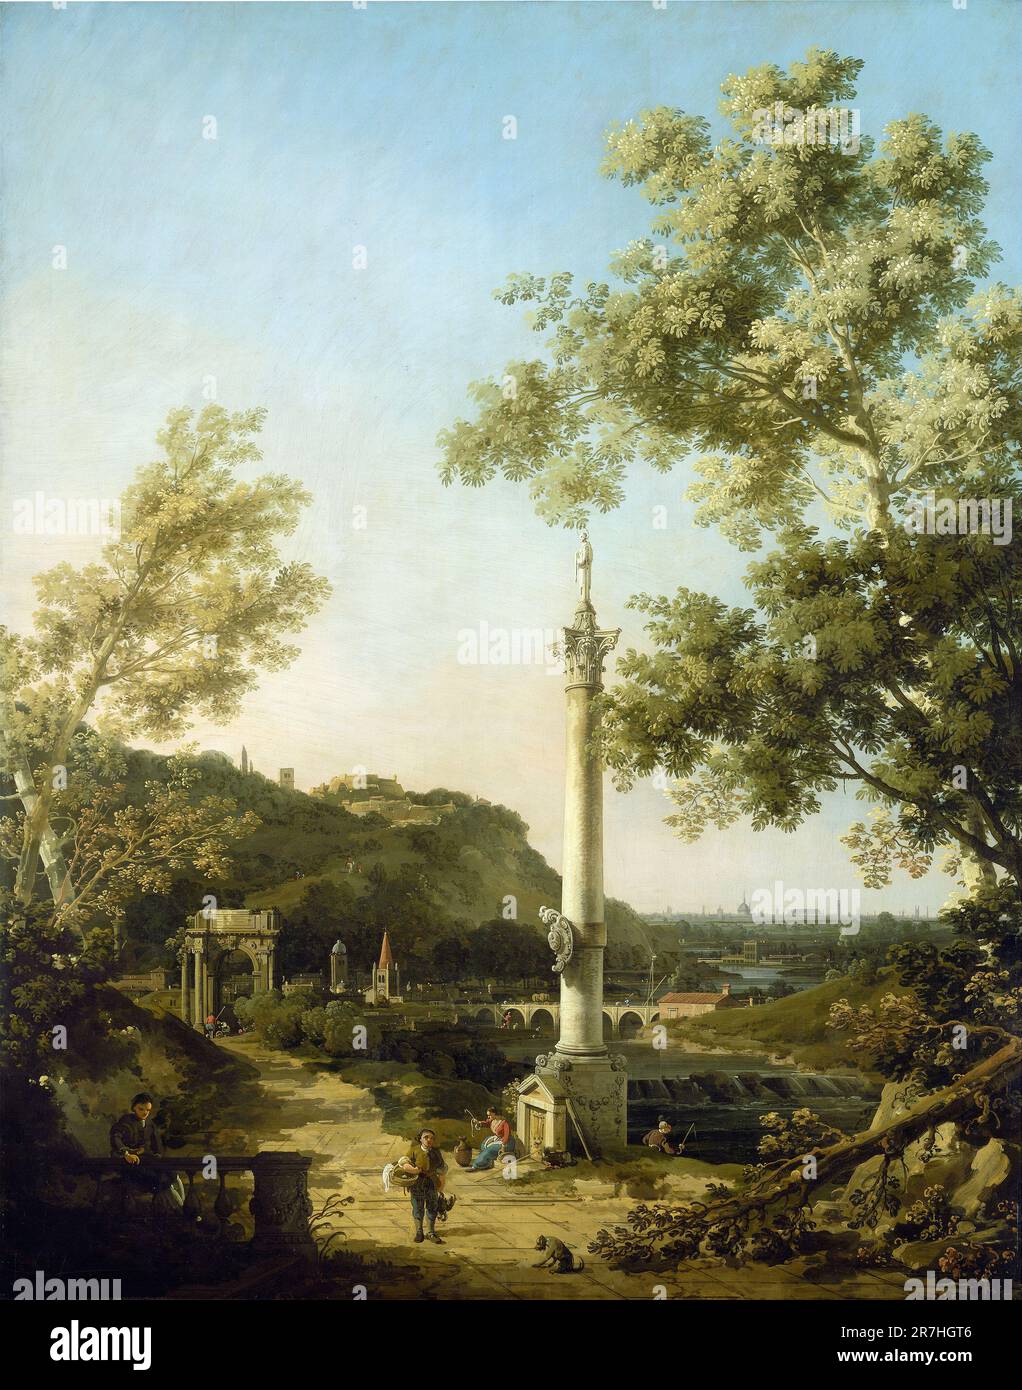 English Landscape Capriccio with a Column  painted by the Venetian painter Giovanni Antonio Canal, commonly known as Canaletto, in c. 1754.  Canaletto specialised in realsitic city scenes (called Verduti) but occasionally he painted from his imagination, which he called Capriccio. Stock Photo